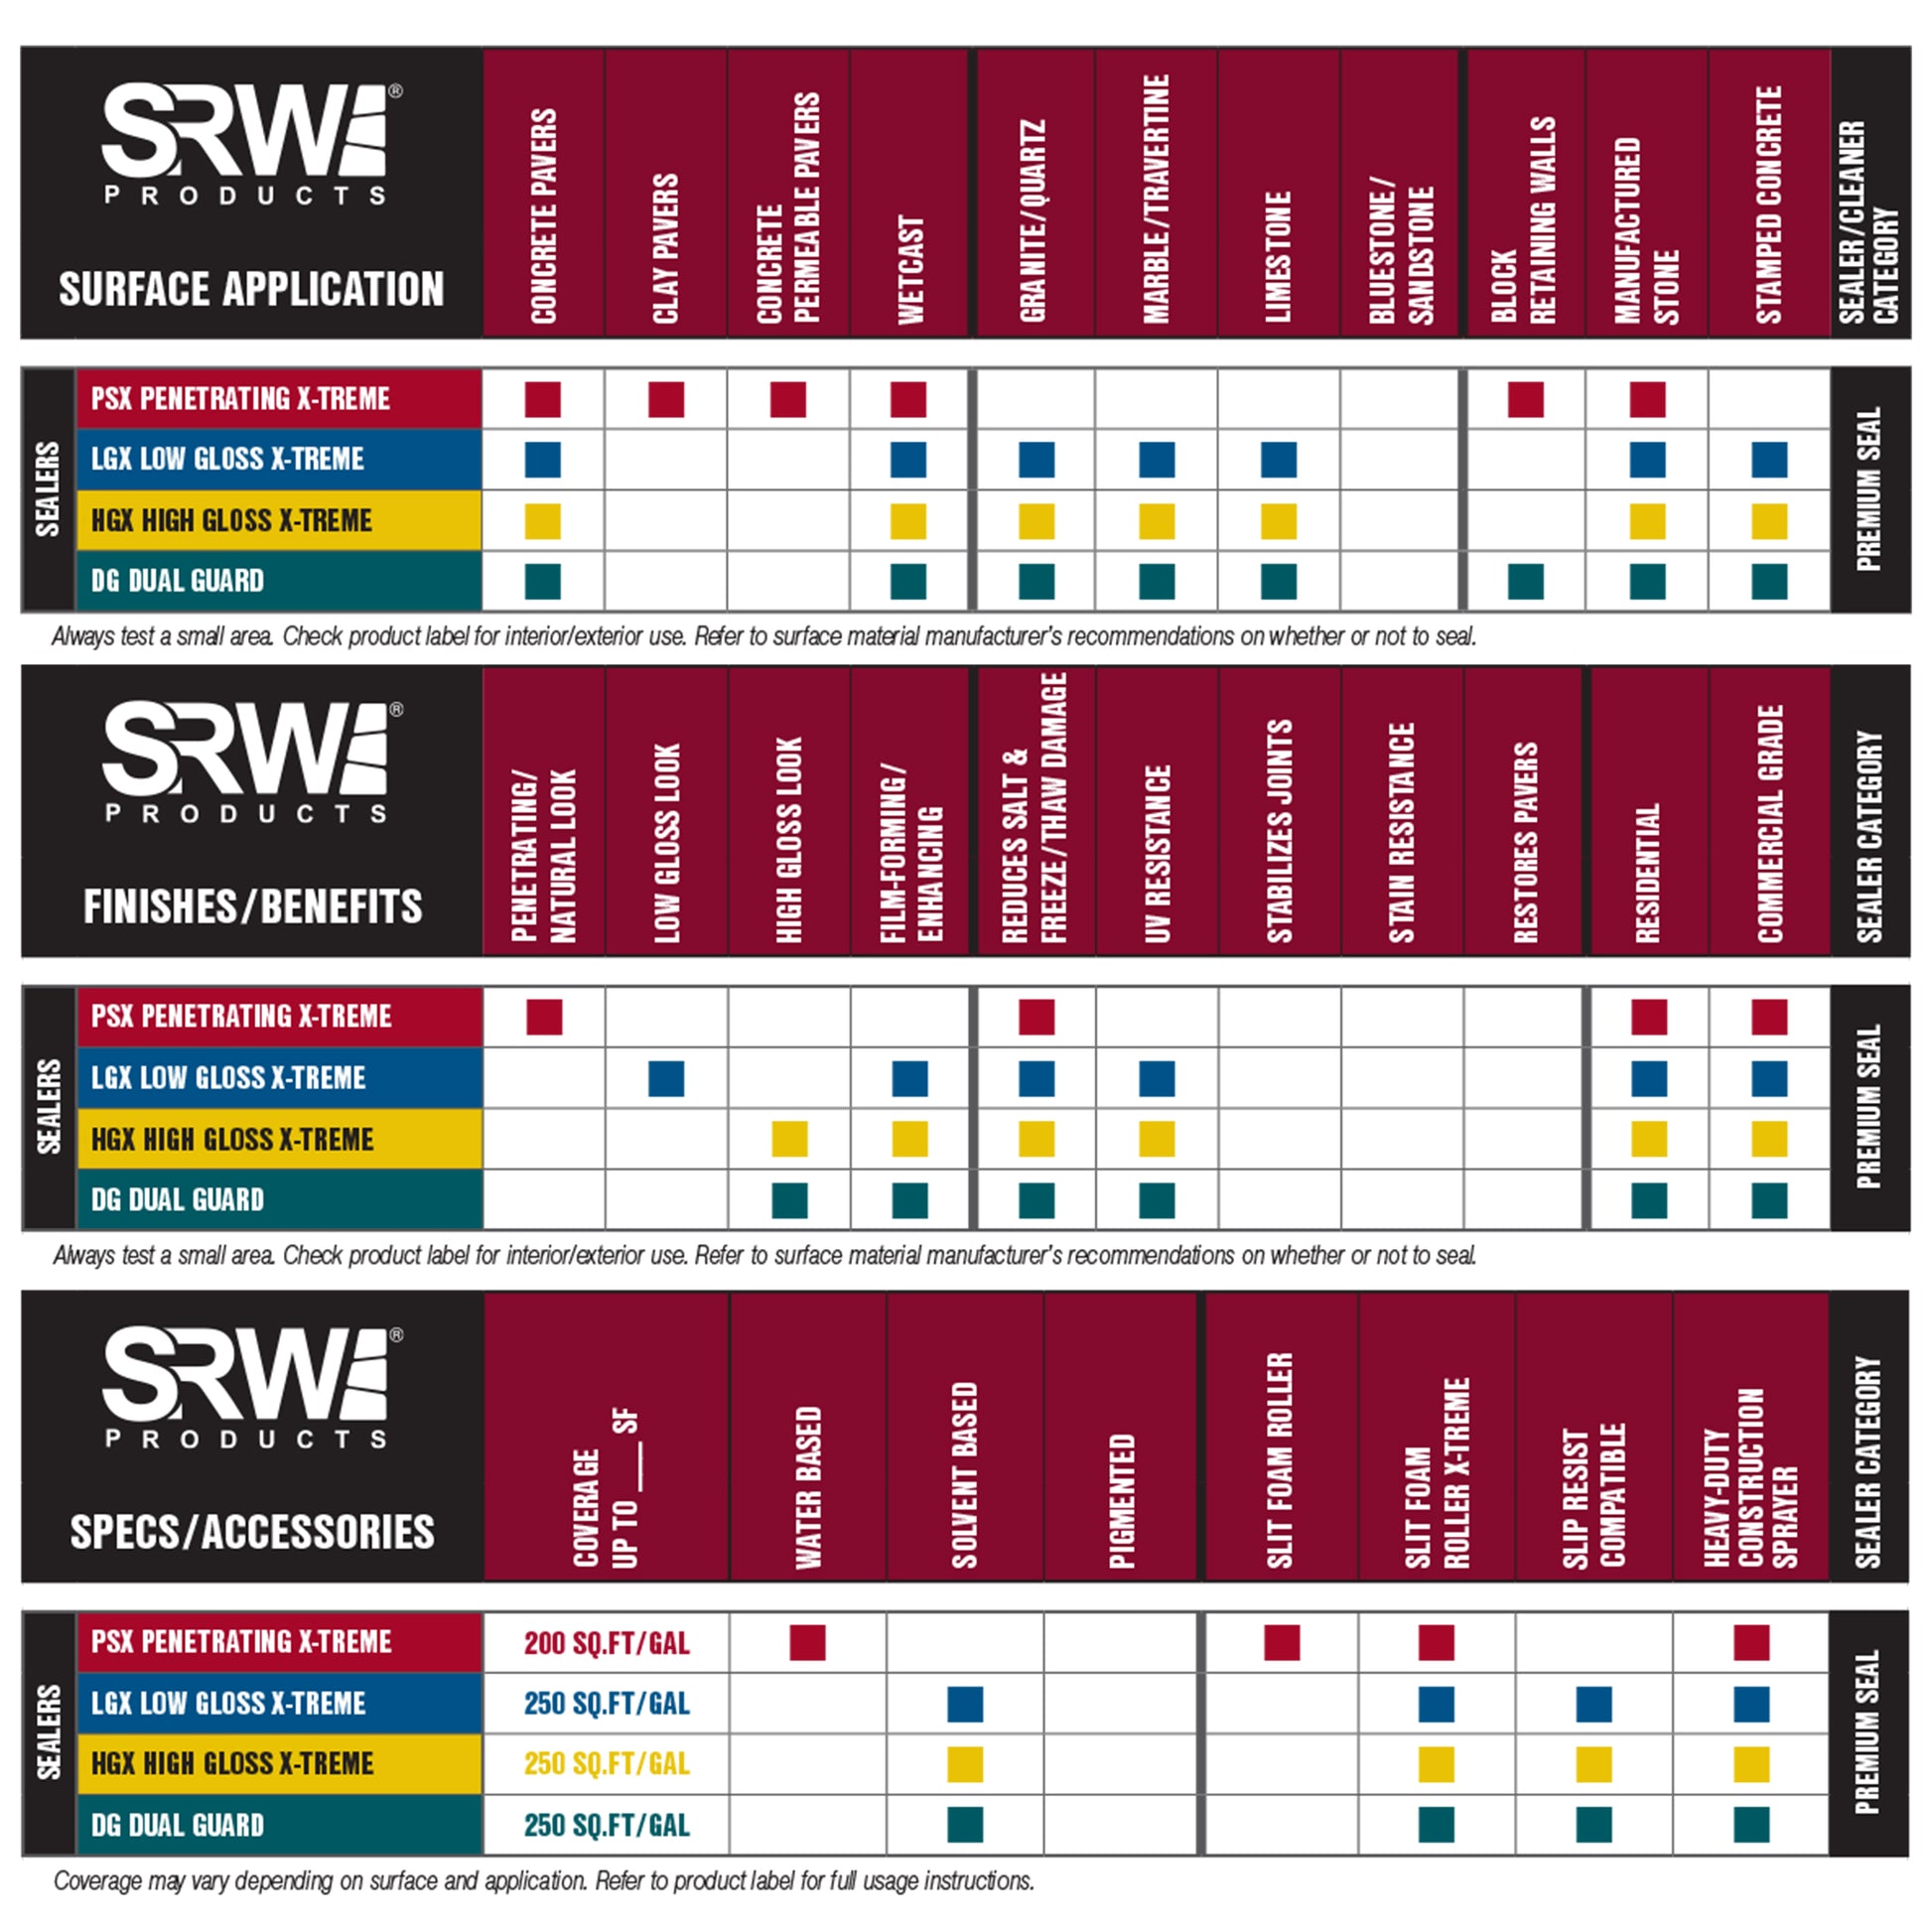 SRW Products product chart